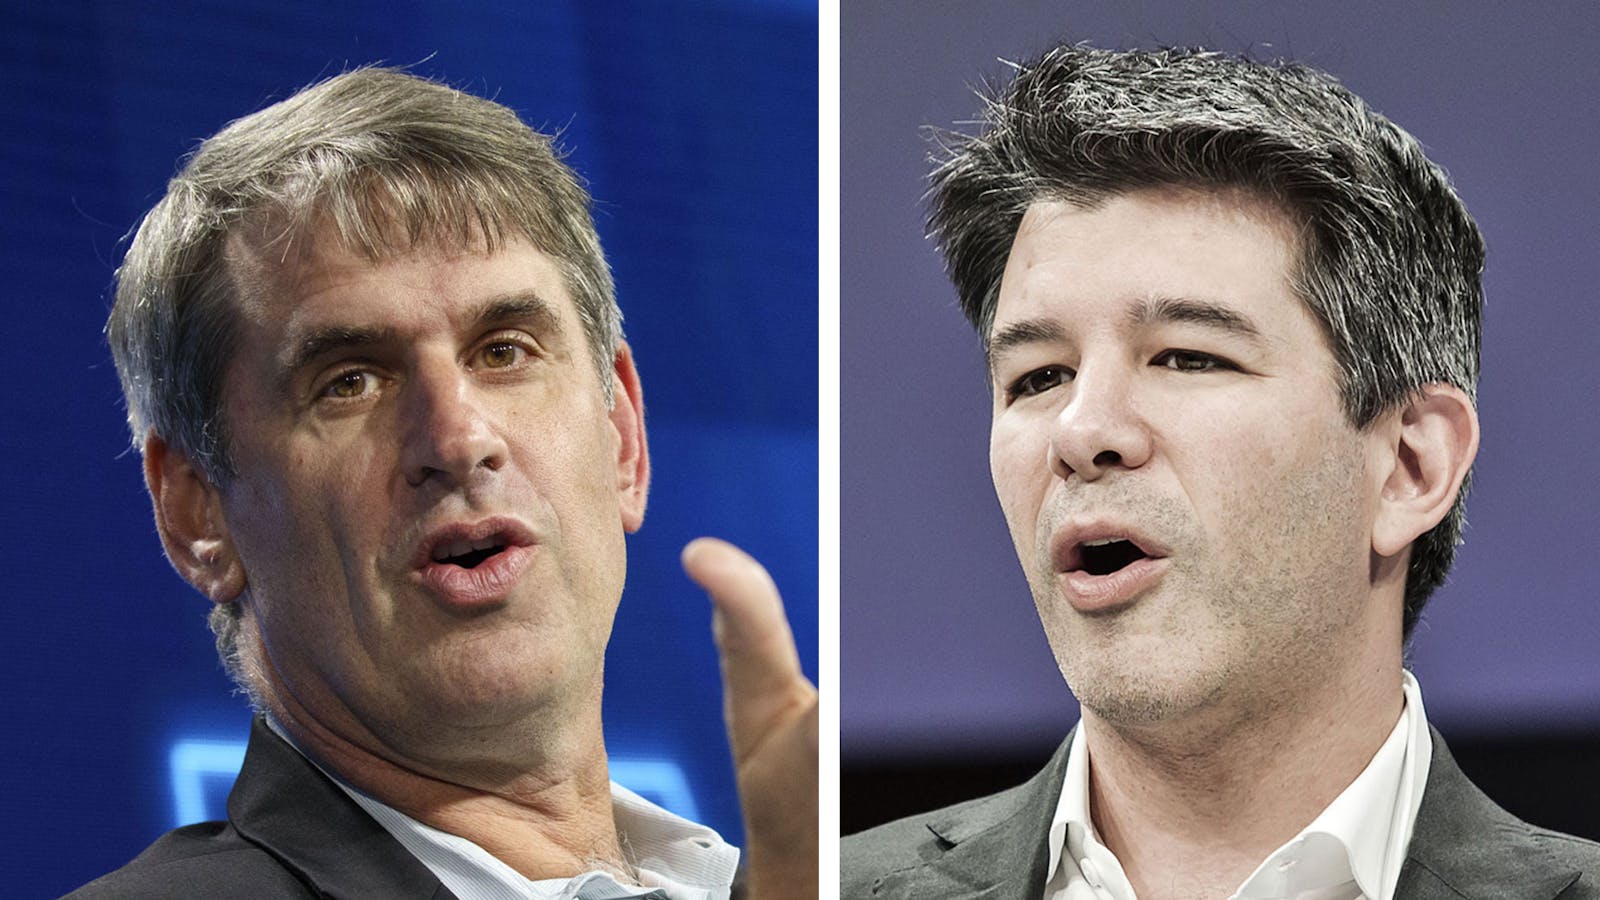 Benchmark partner Bill Gurley (left) and former CEO Travis Kalanick. Photos by Bloomberg.